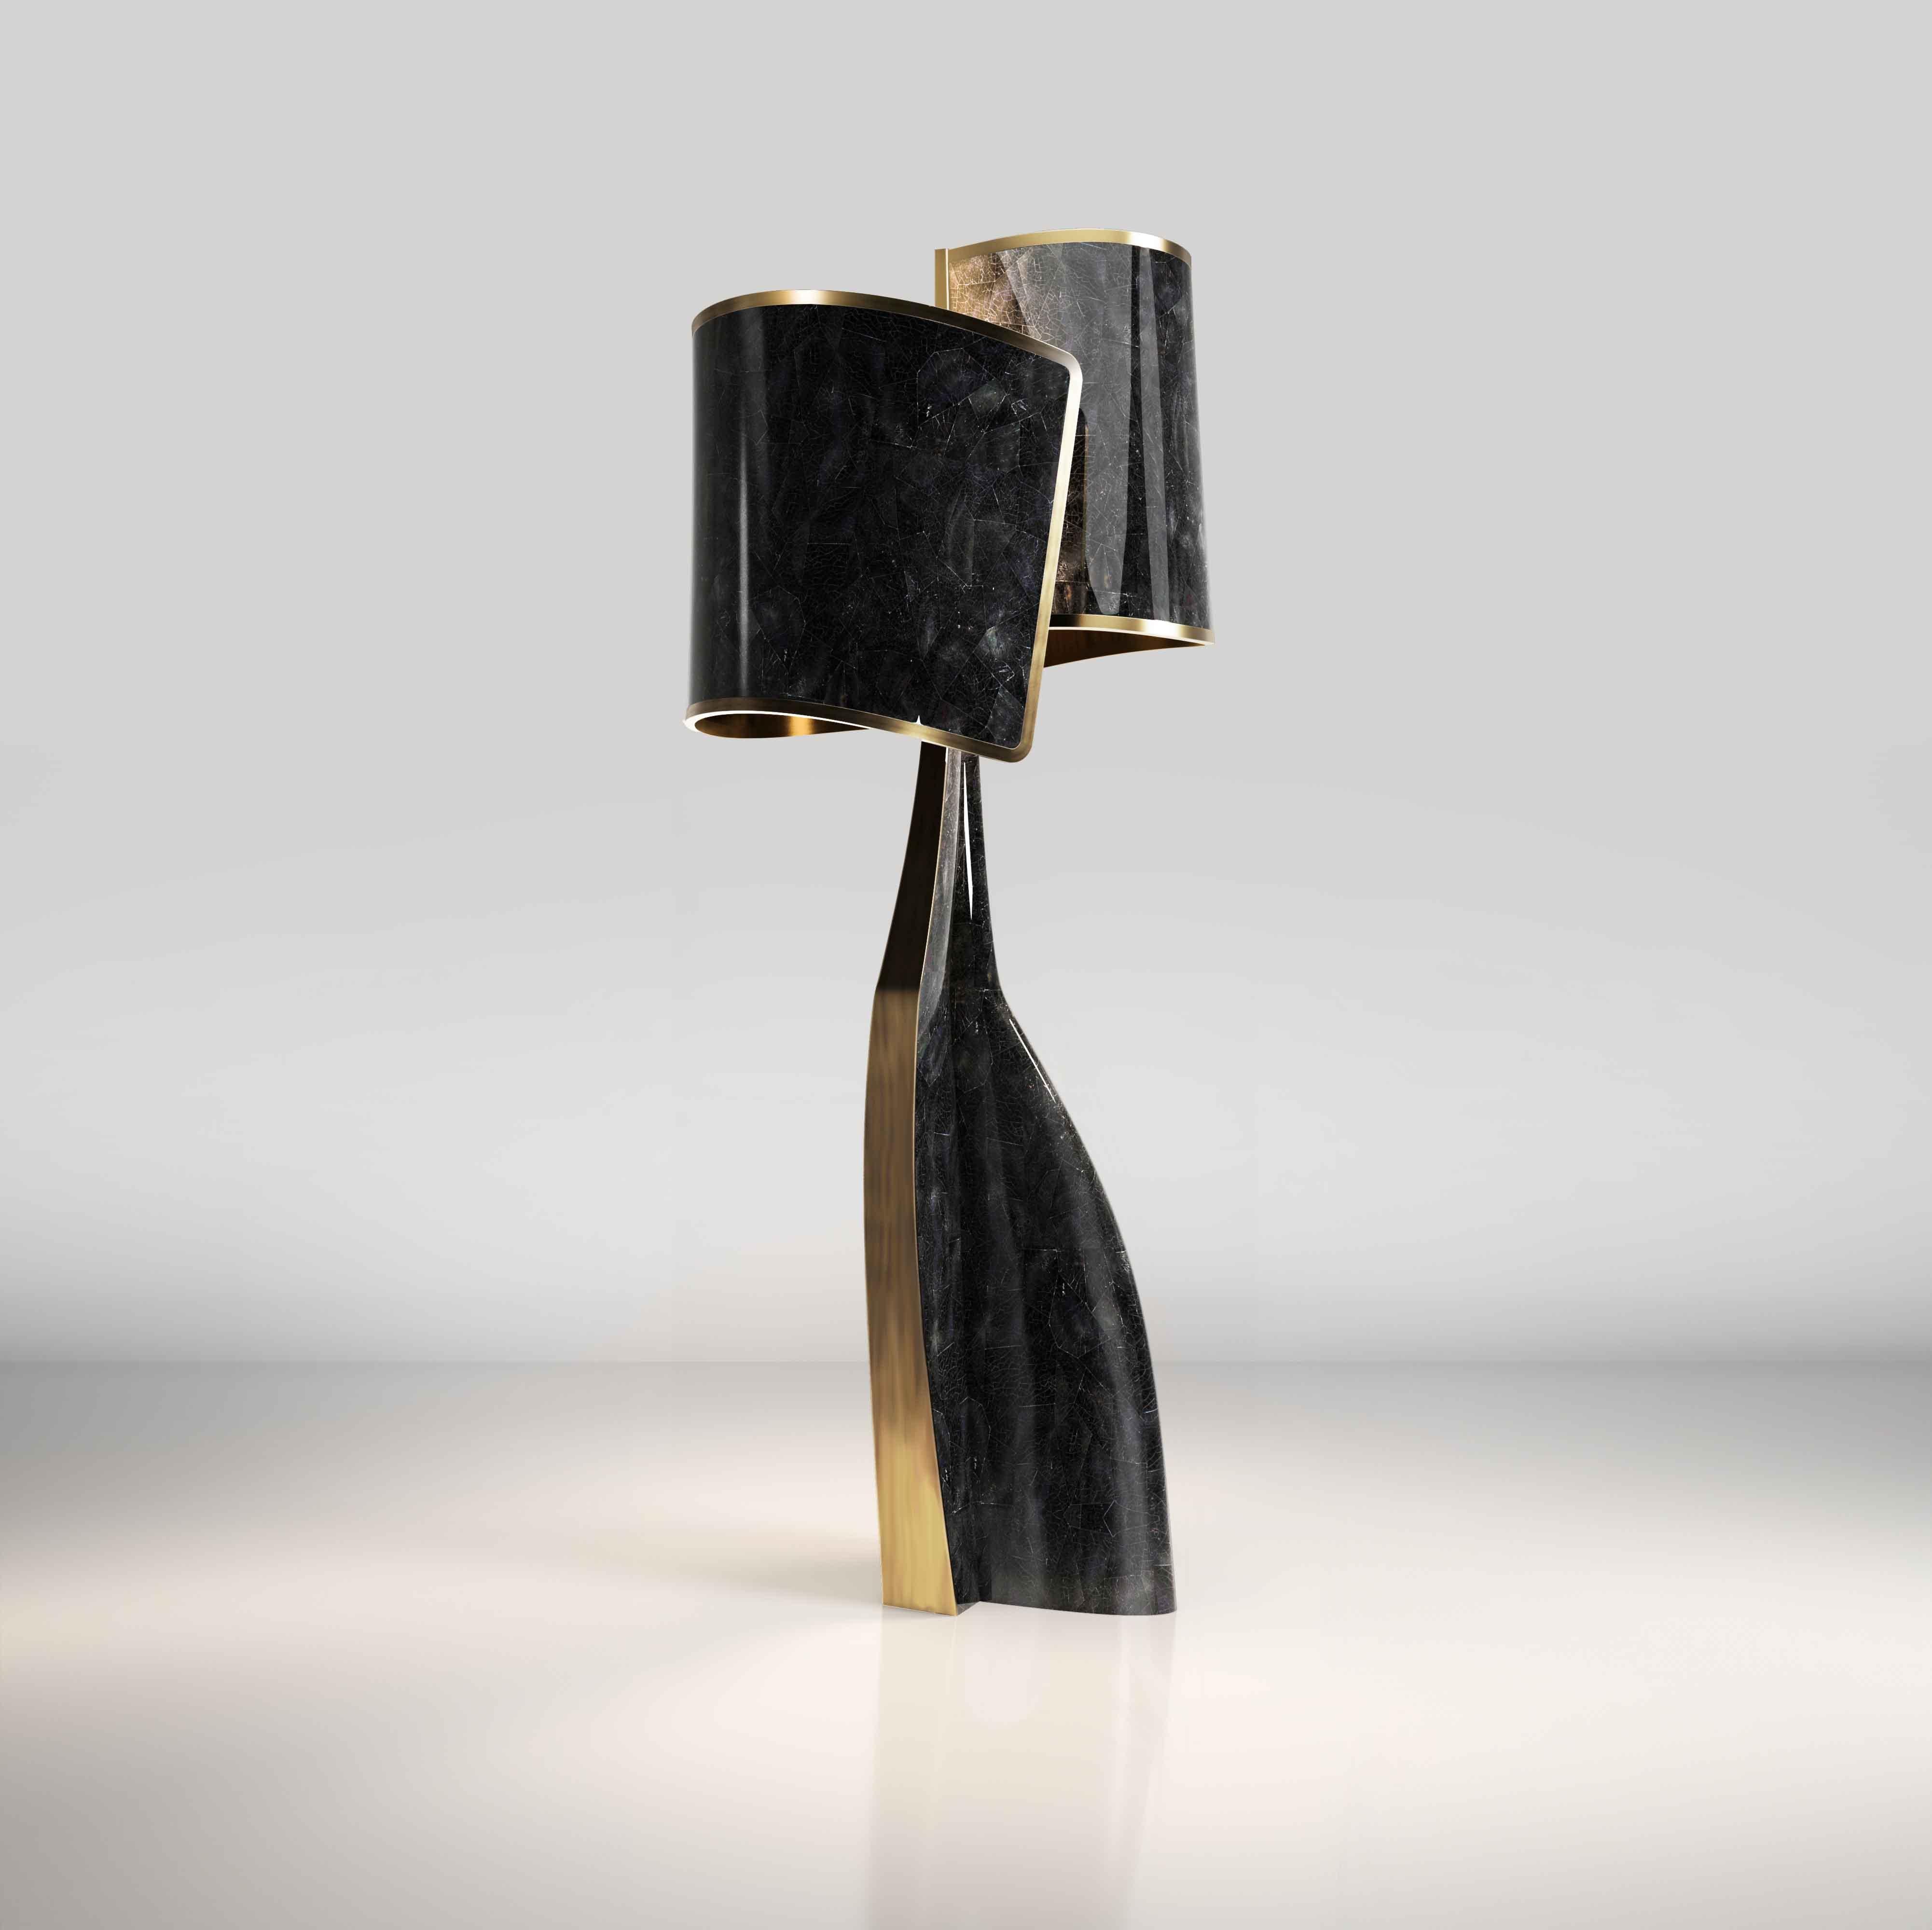 The Chital III Floor Lamp by Kifu Paris is a sleek and sculptural piece, inlaid in a mixture of bronze-patina brass and black pen shell. The chiseled legs, which are an iconic shape within the KIFU PARIS universe, morph into the solid shades that